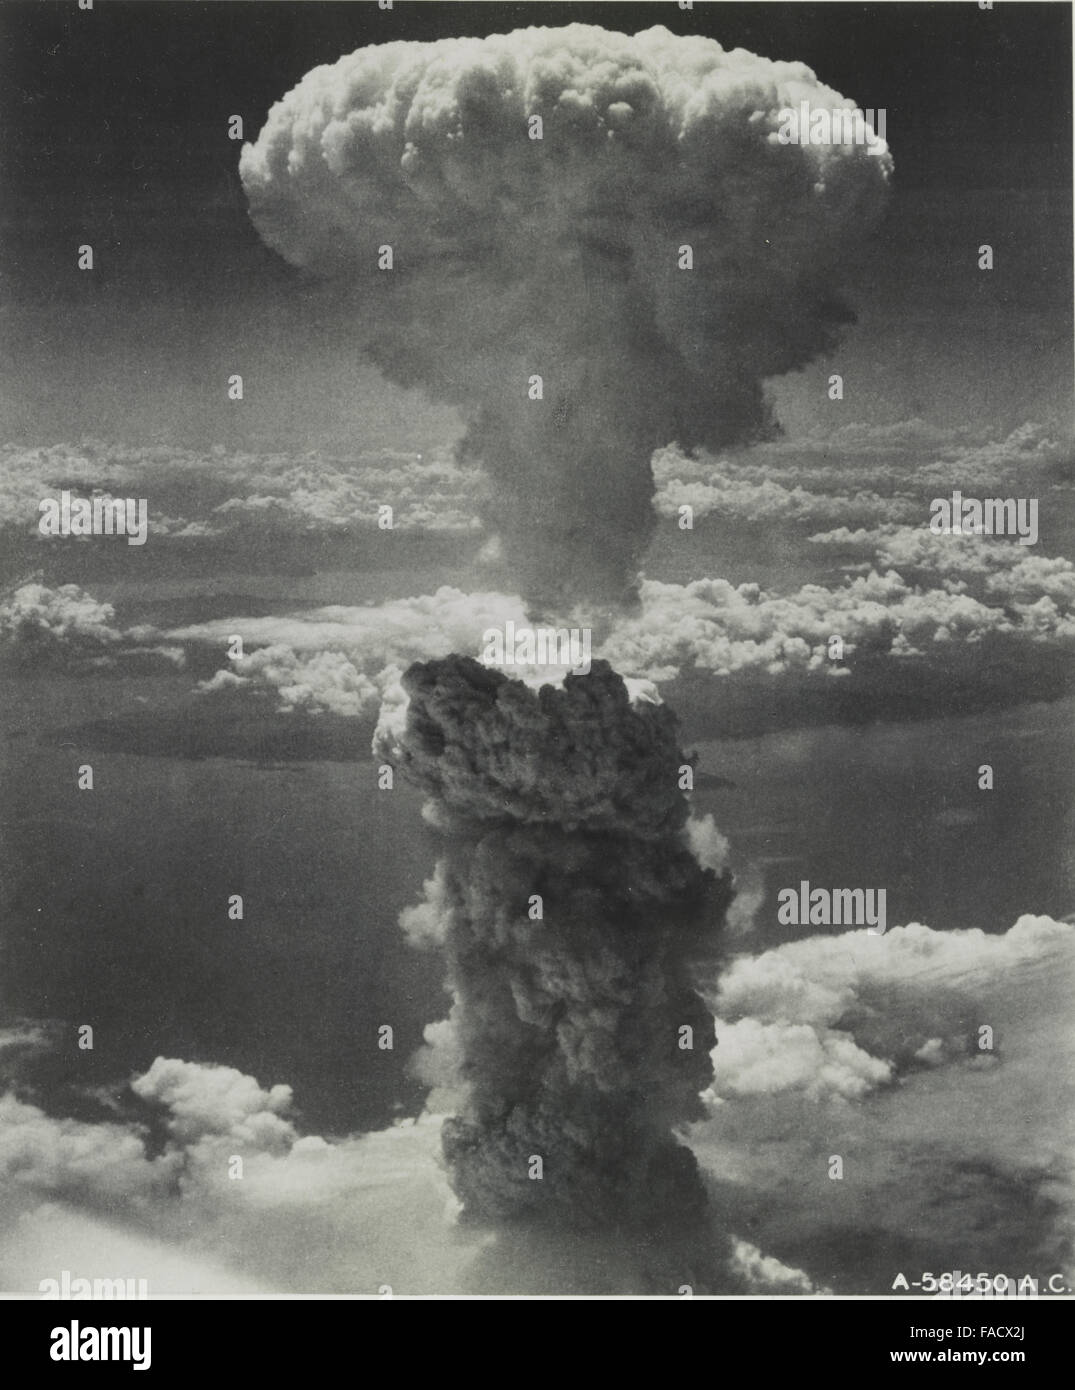 Nagasaki, Japan under atomic bomb attack  August 9, 1945. Atomic bomb mushroom cloud over Nagasaki. Credit: Library of Congress/United States. Army Air Forces. Stock Photo